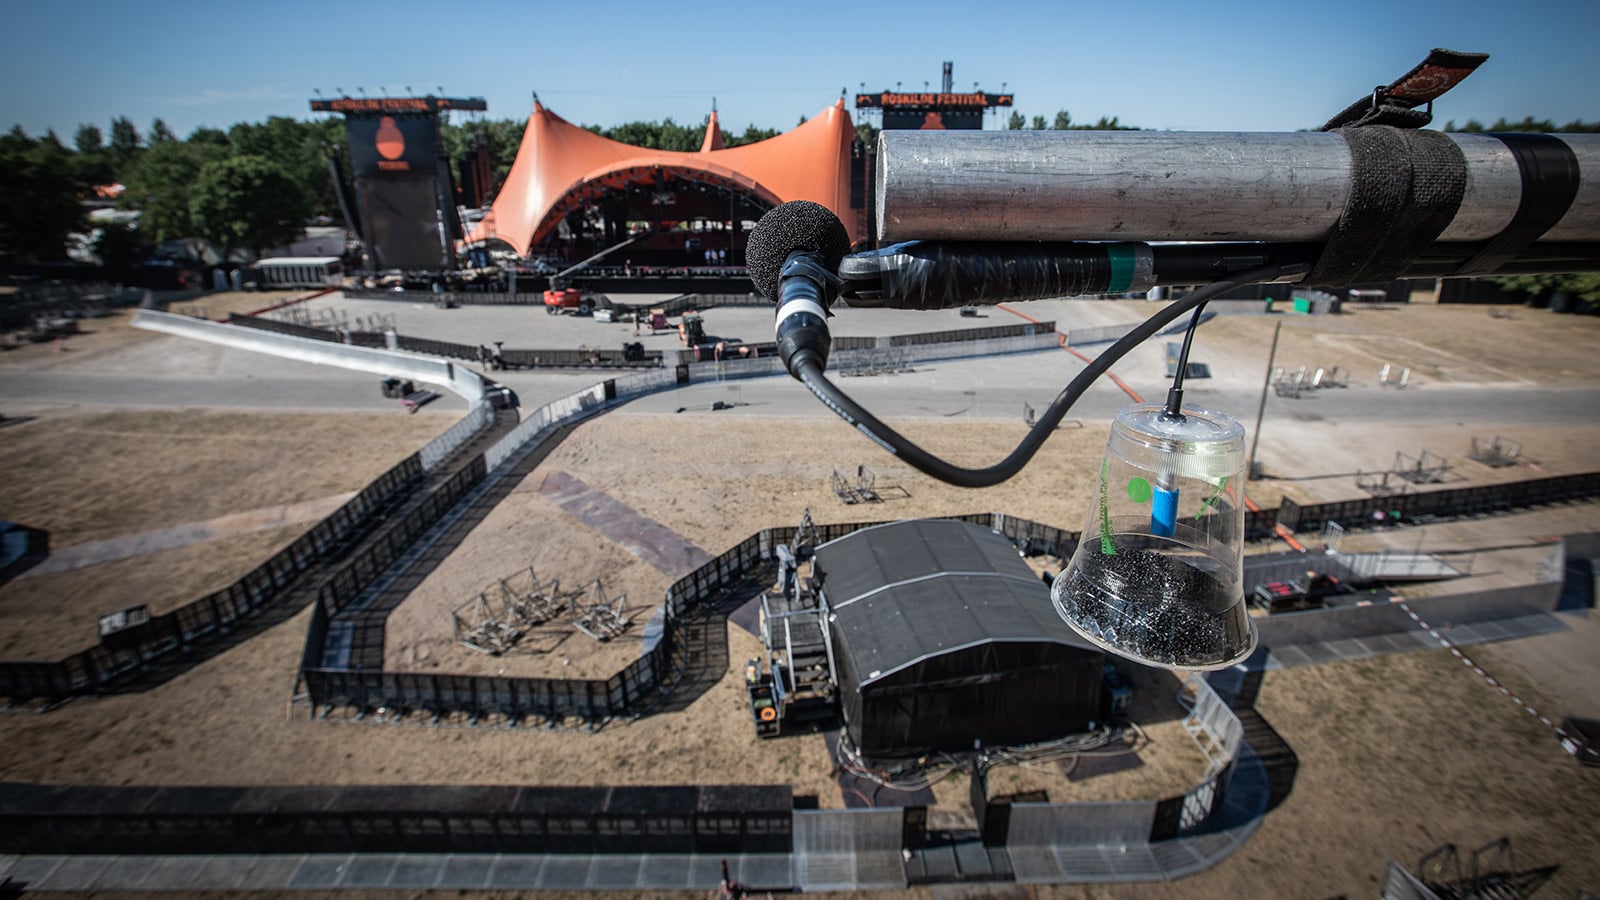 Roskilde Festival Offers a Rare “Laboratory” for Meyer Sound Research